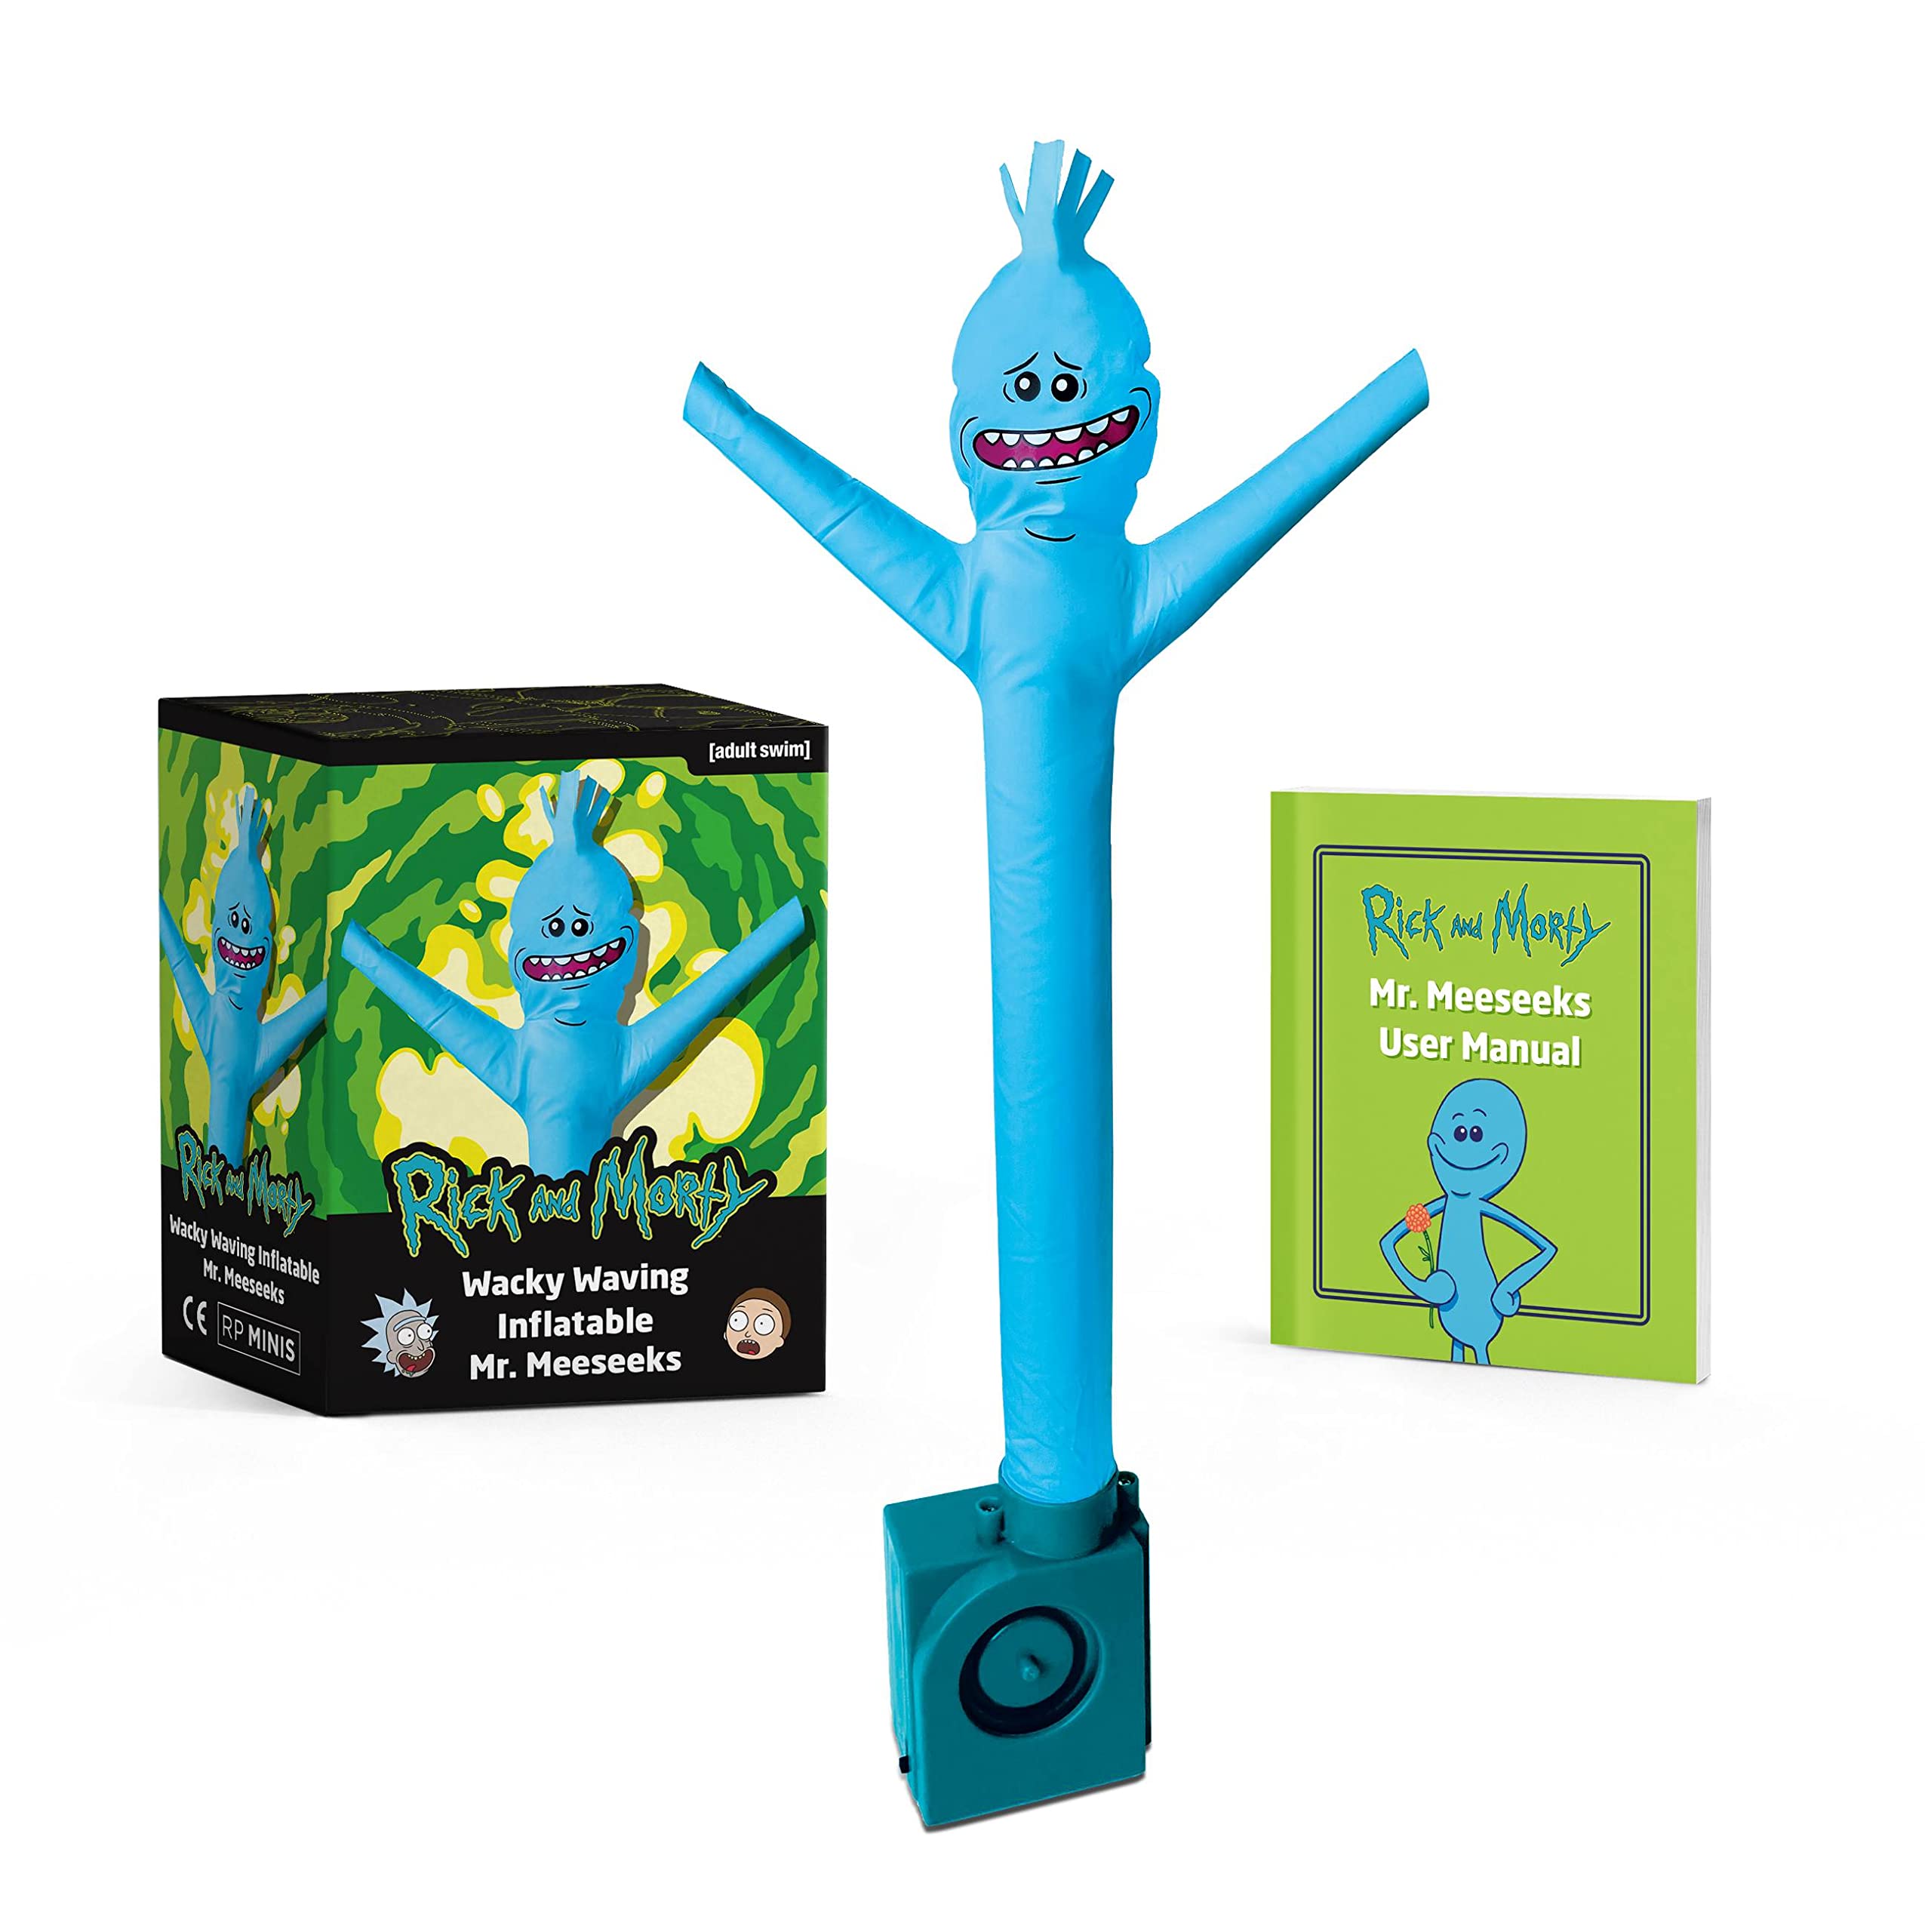 Rick and Morty Wacky Waving Inflatable Mr. Meeseeks (Paperback)